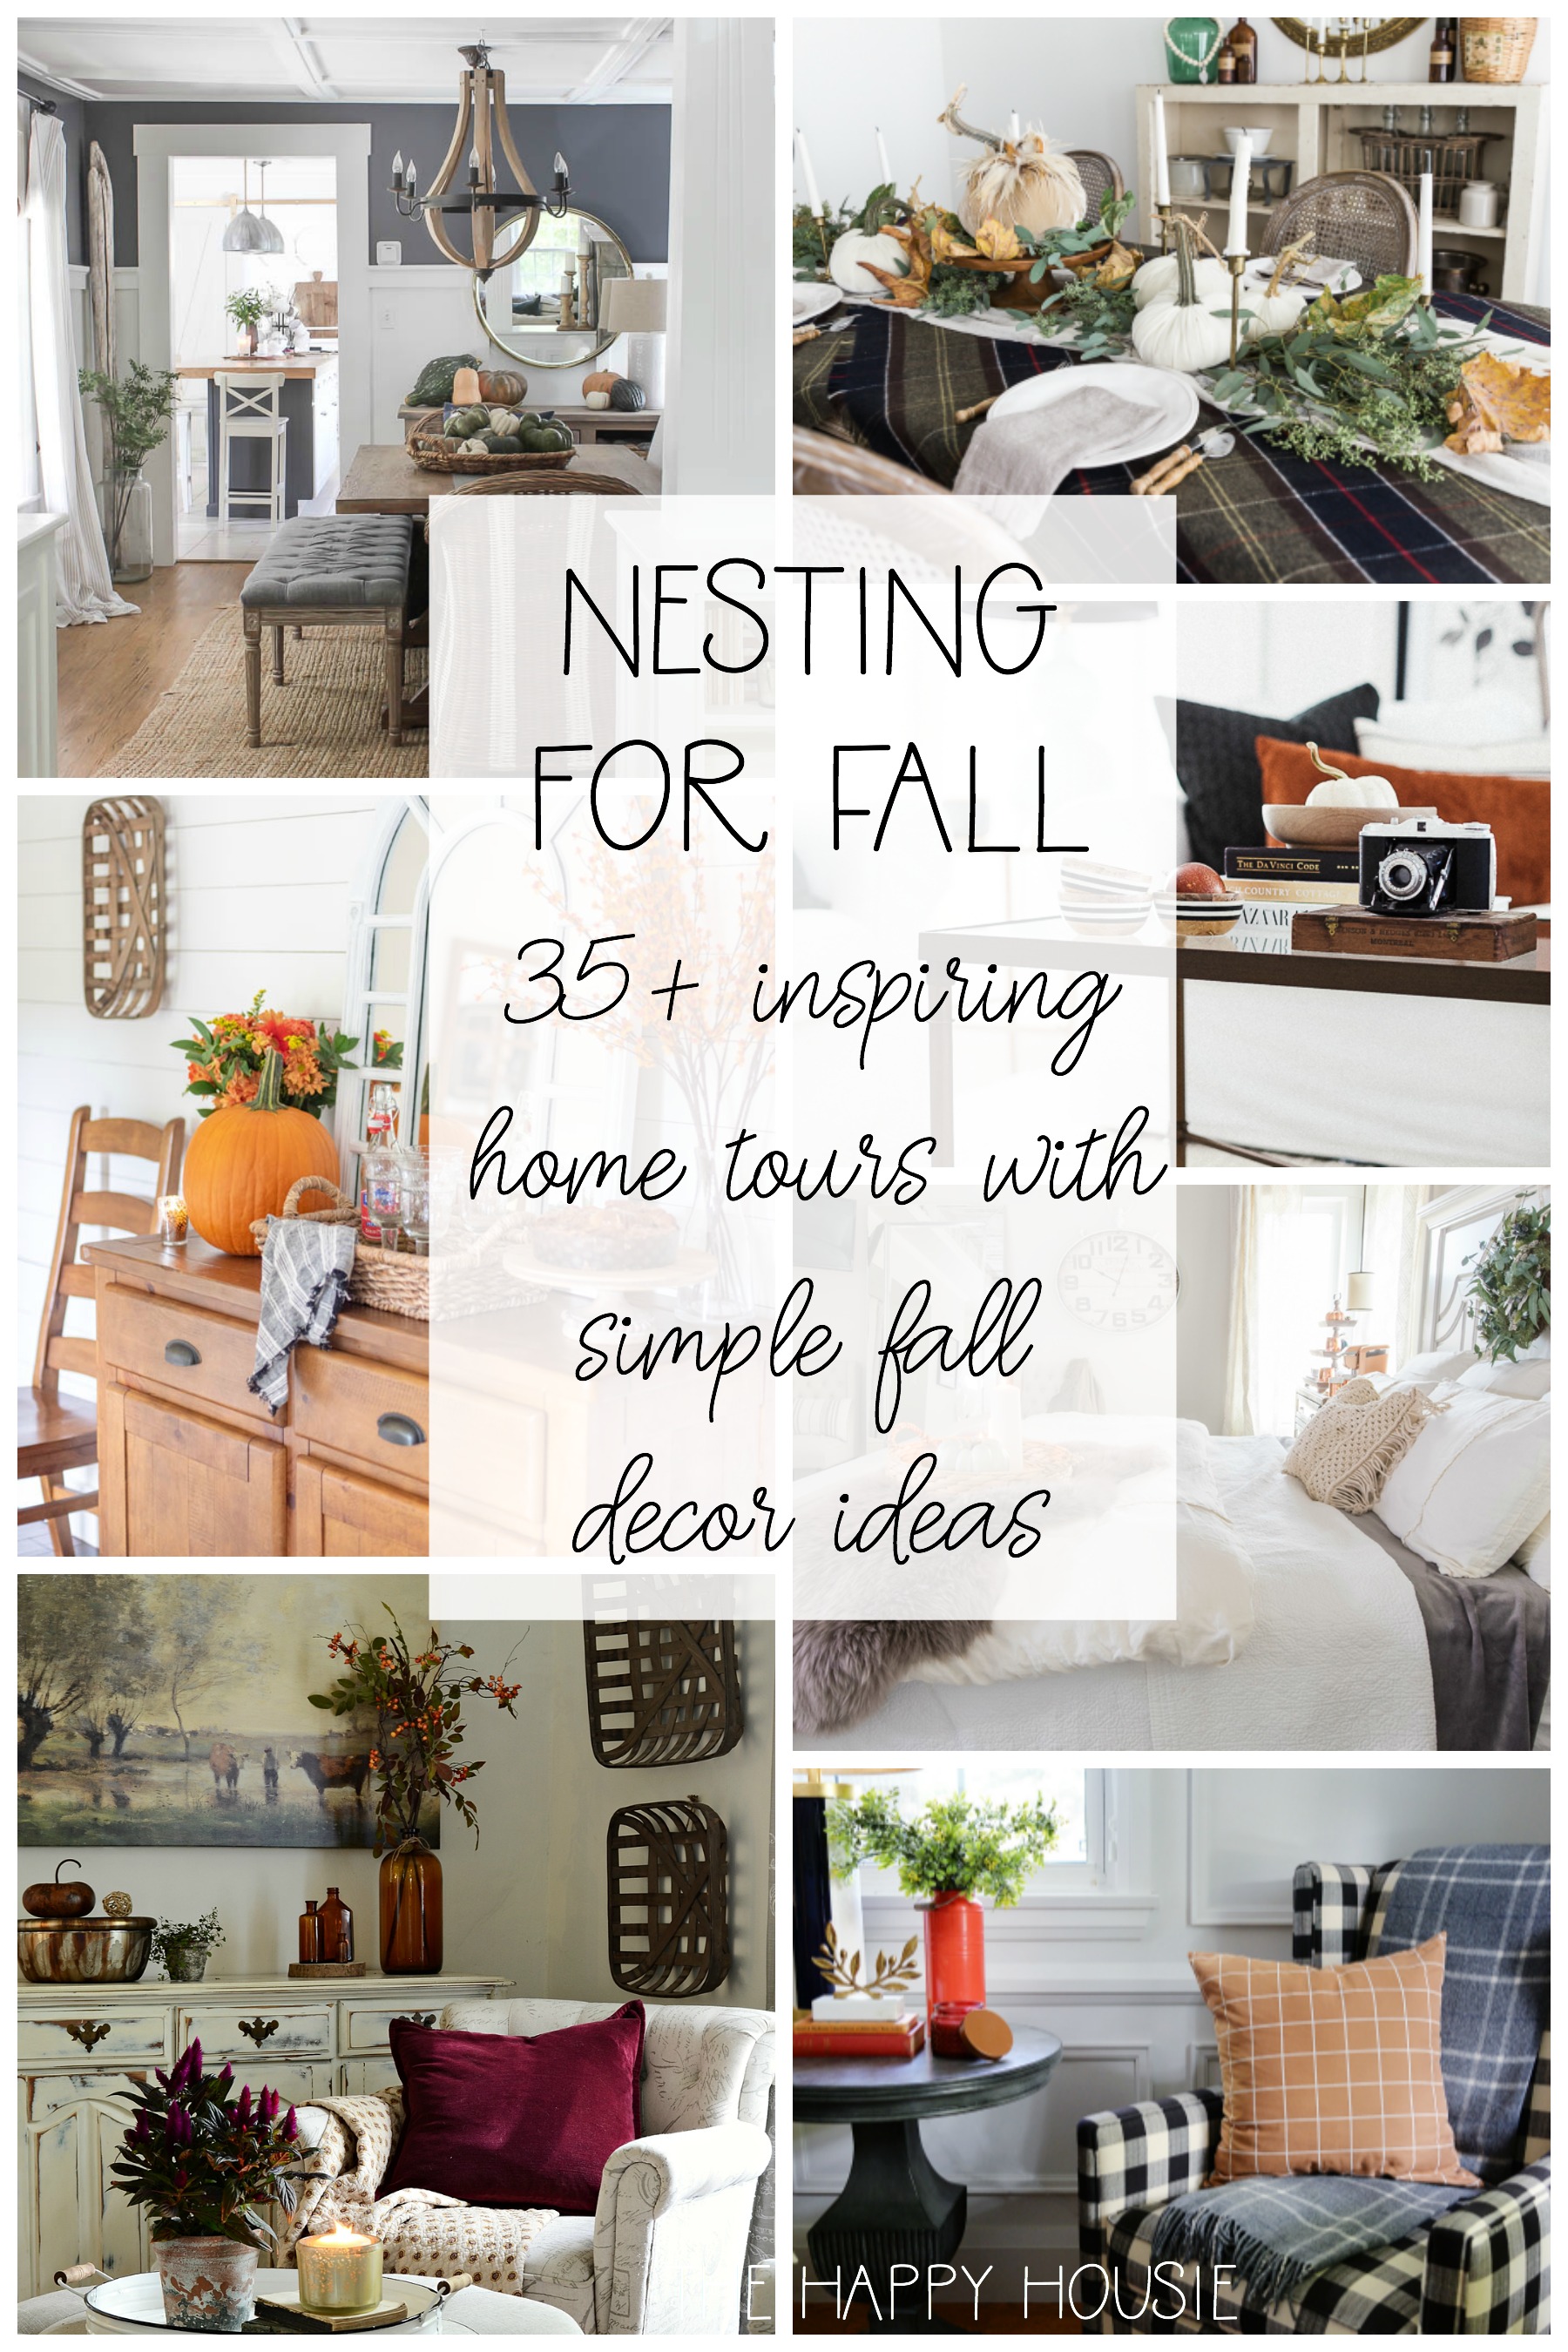 Nesting For Fall 35+ inspiring home tours with simple fall decor ideas poster.